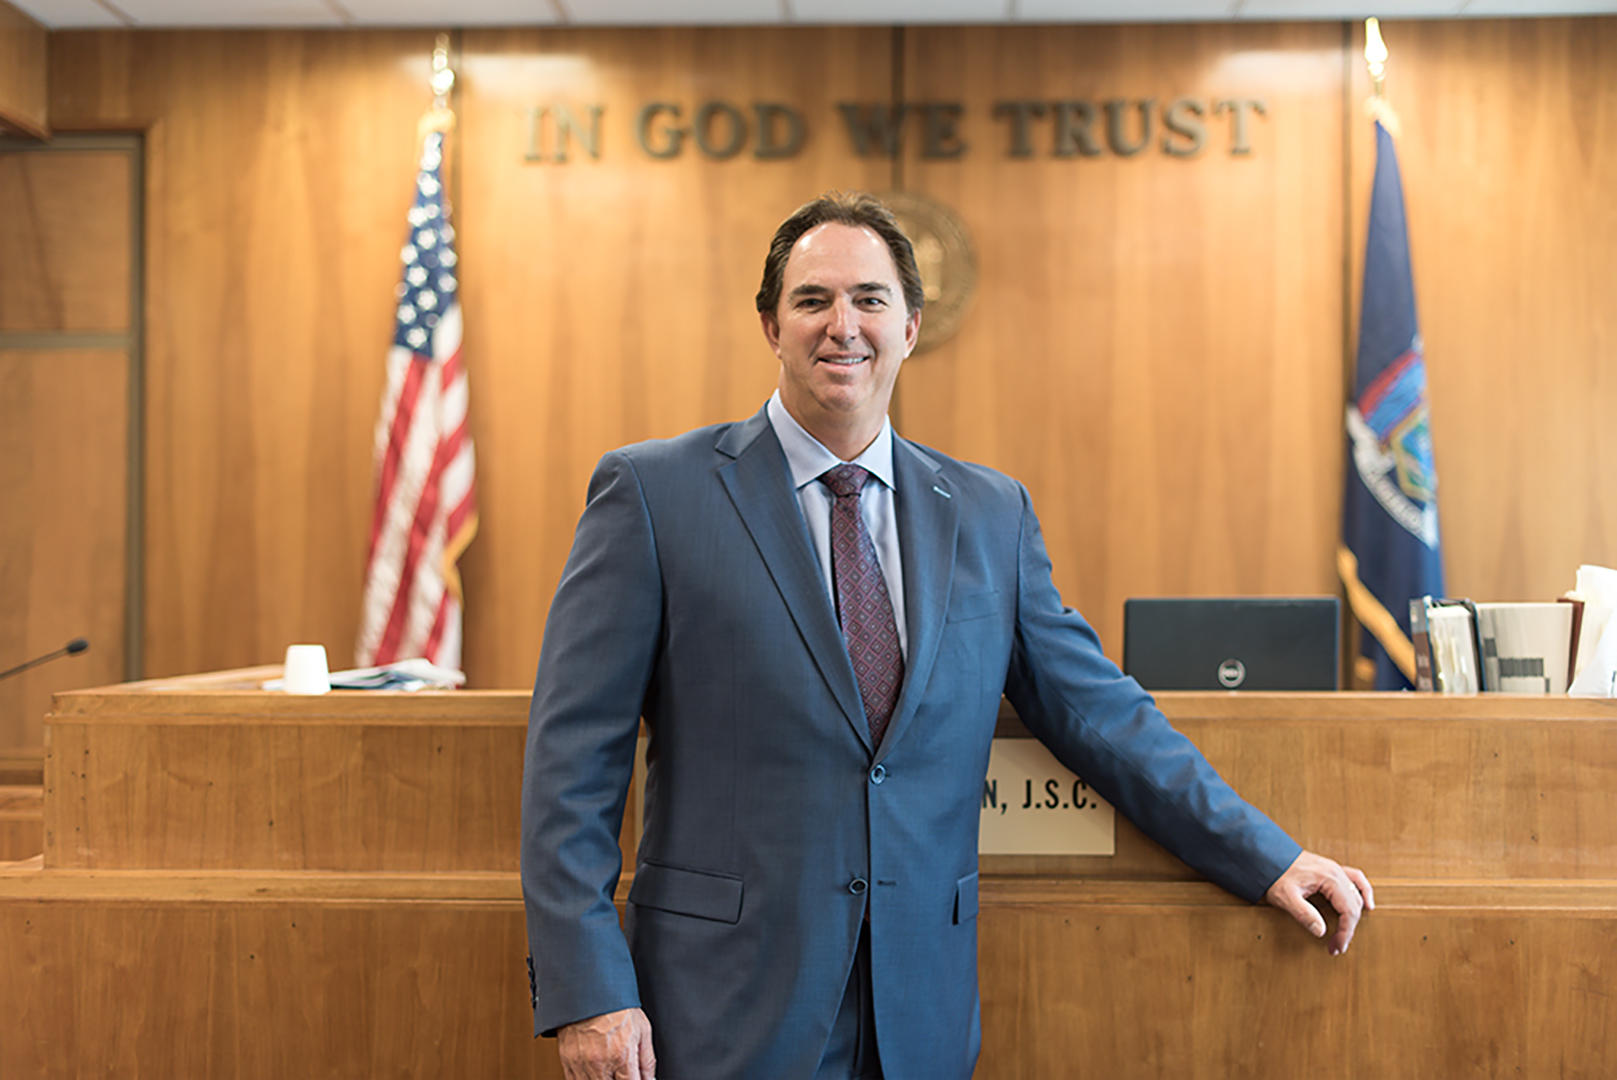 Attorney David J. Raimondo, Esq. is a native of Long Island who has represented personal injury plaintiffs on Long Island for most of his 30 years in practice.